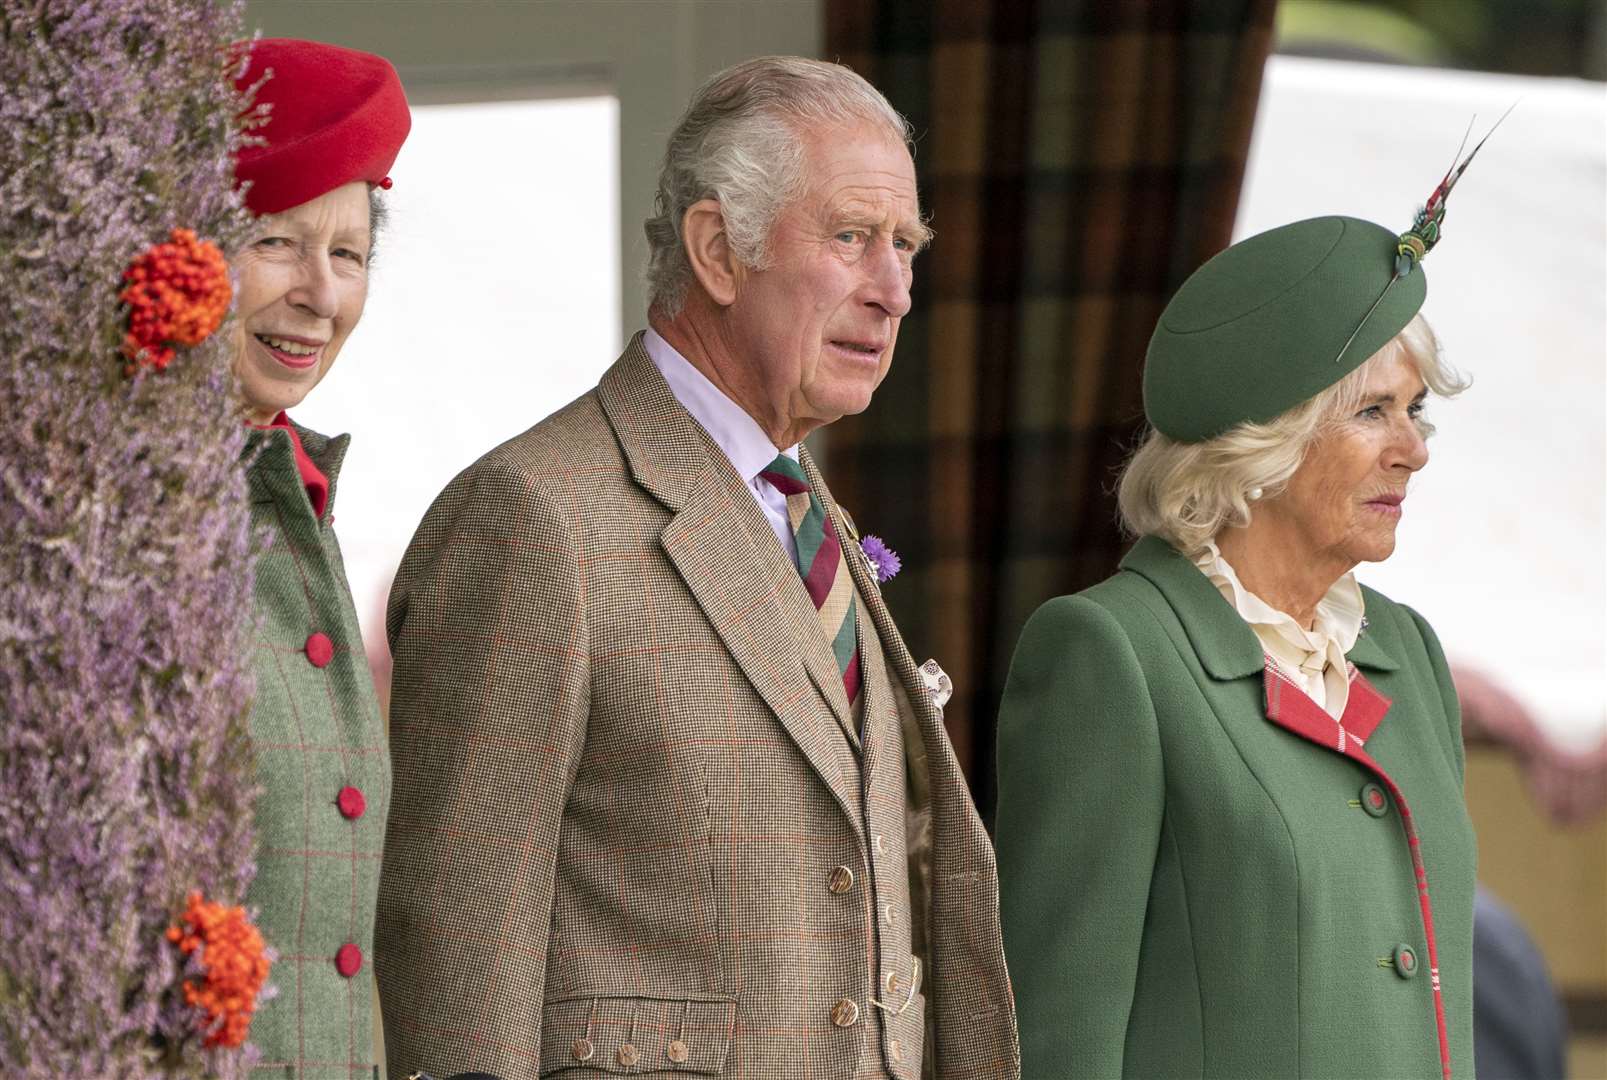 Anne, Charles and Camilla were already in Scotland, attending the Braemar Gathering a few days before (Jane Barlow/PA)